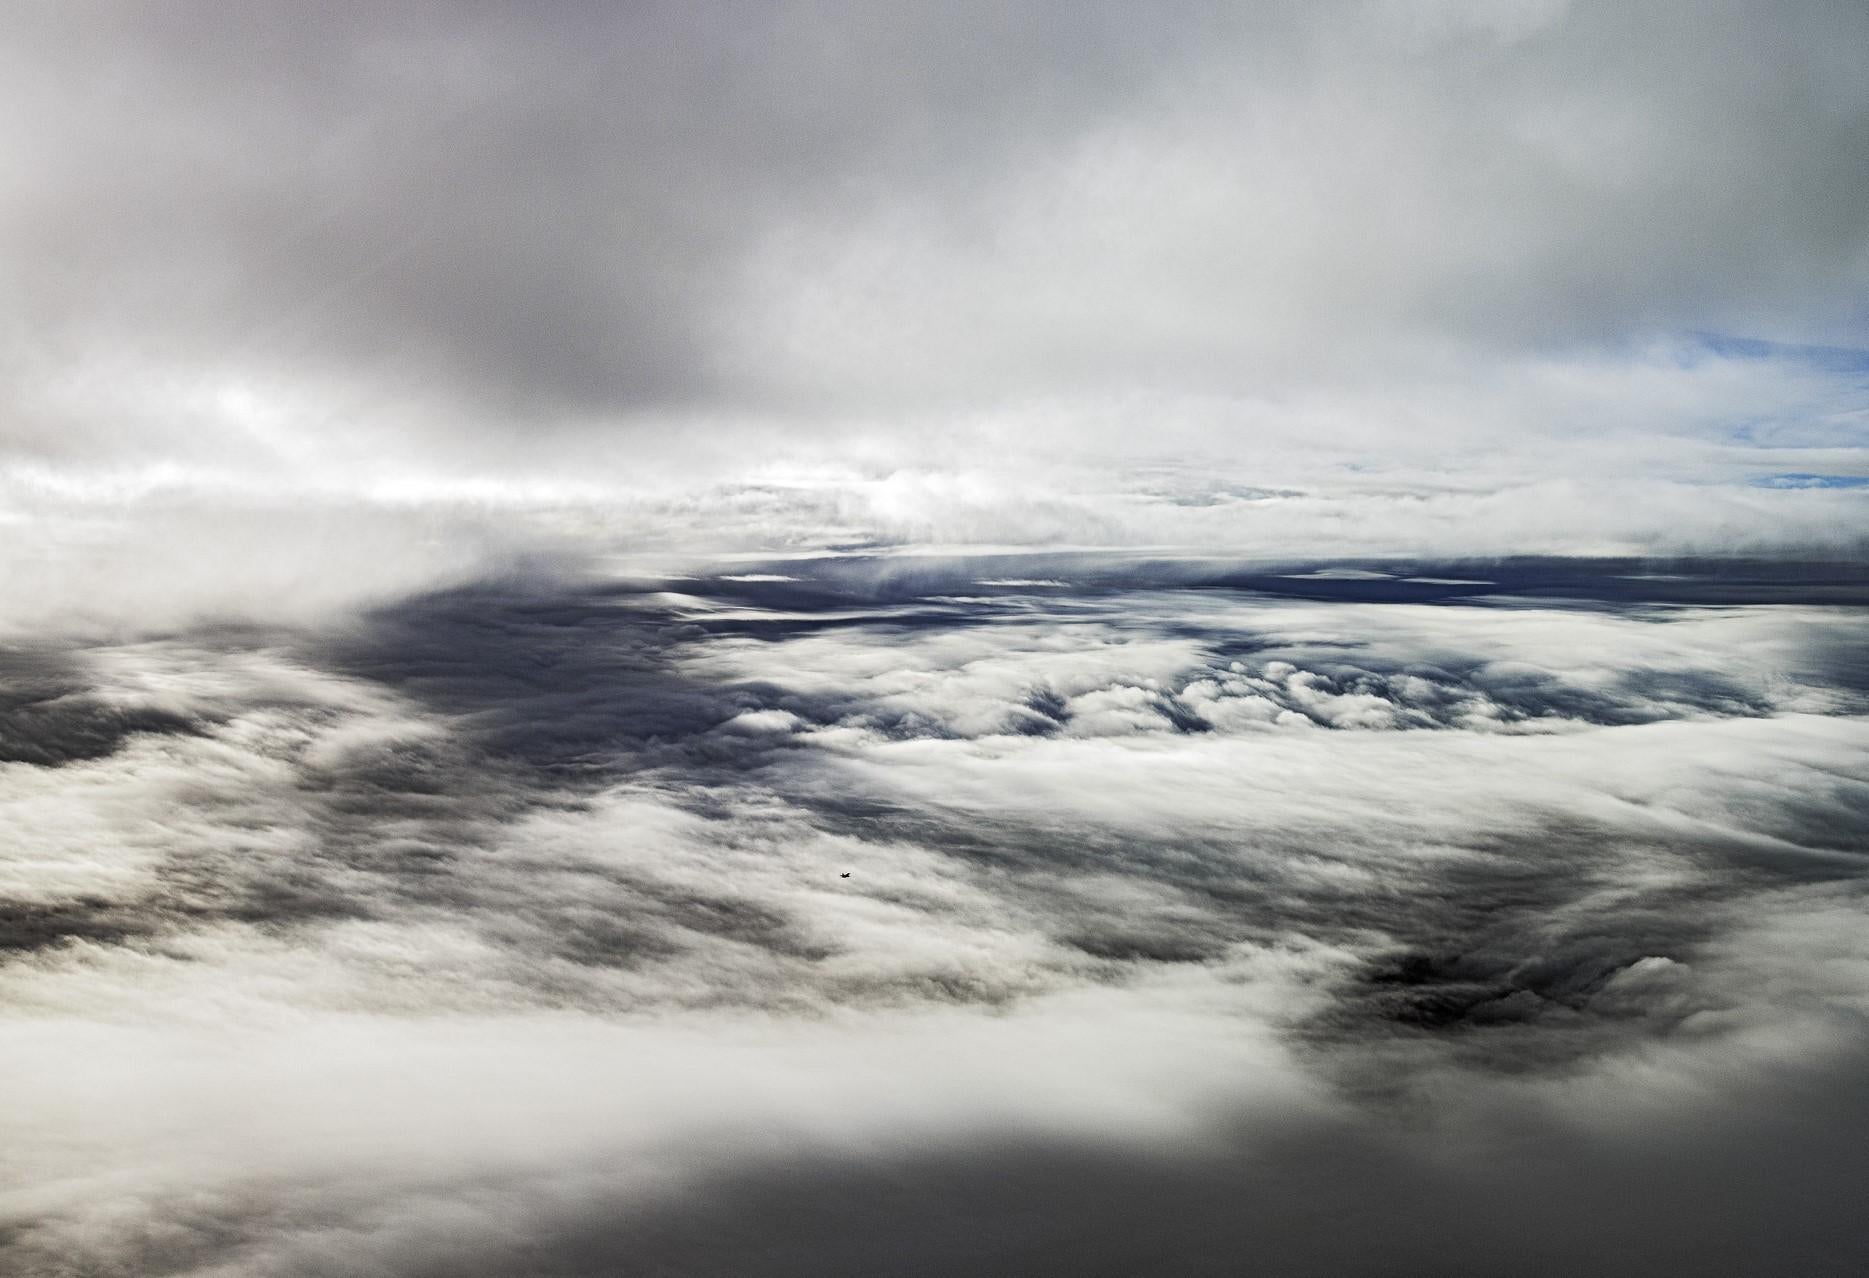 Lost in clouds, UK channel 2014 - # 1 / 7 Limited Edition Fine Art Photography